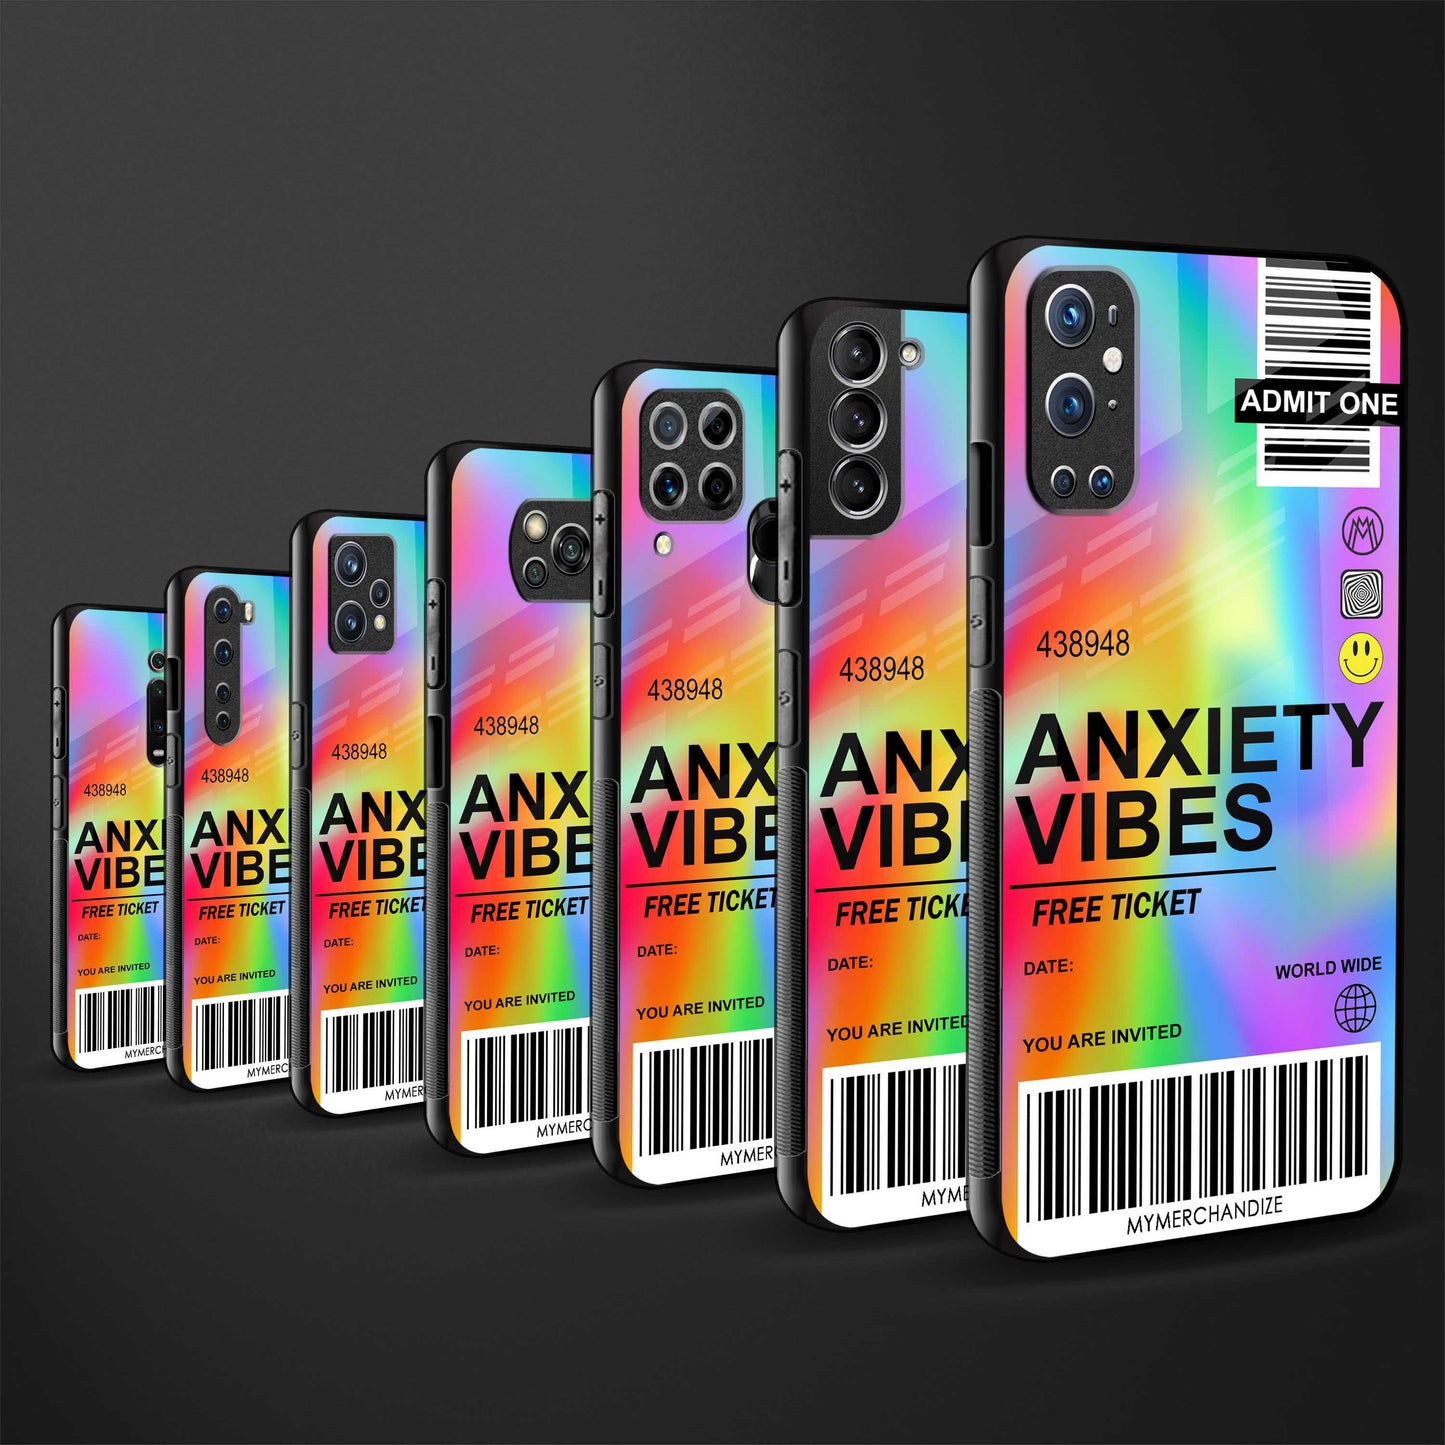 anxiety vibes back phone cover | glass case for iQOO 9 Pro